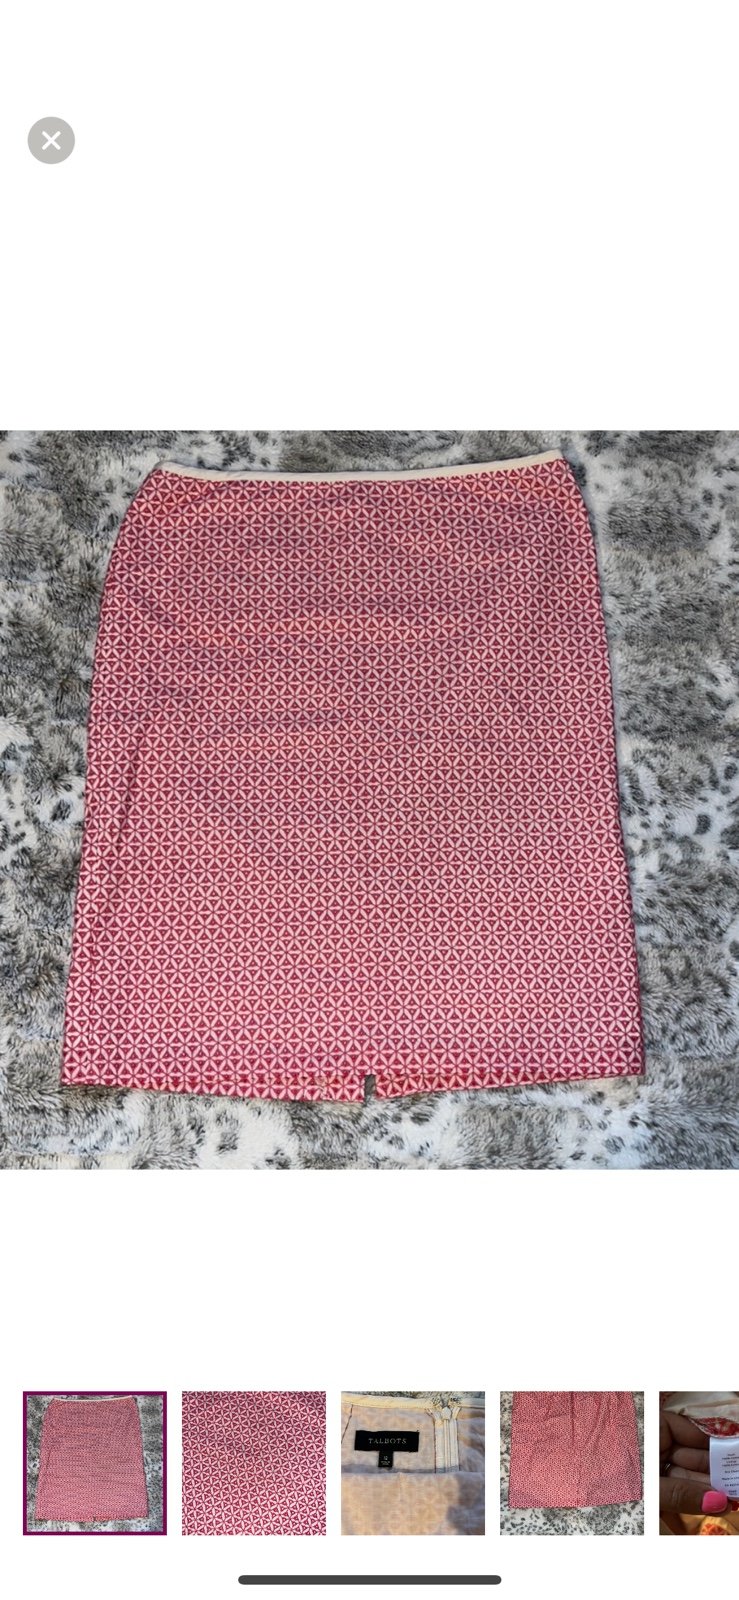 large discount Talbots size 12 pink pencil skirt LByVP4